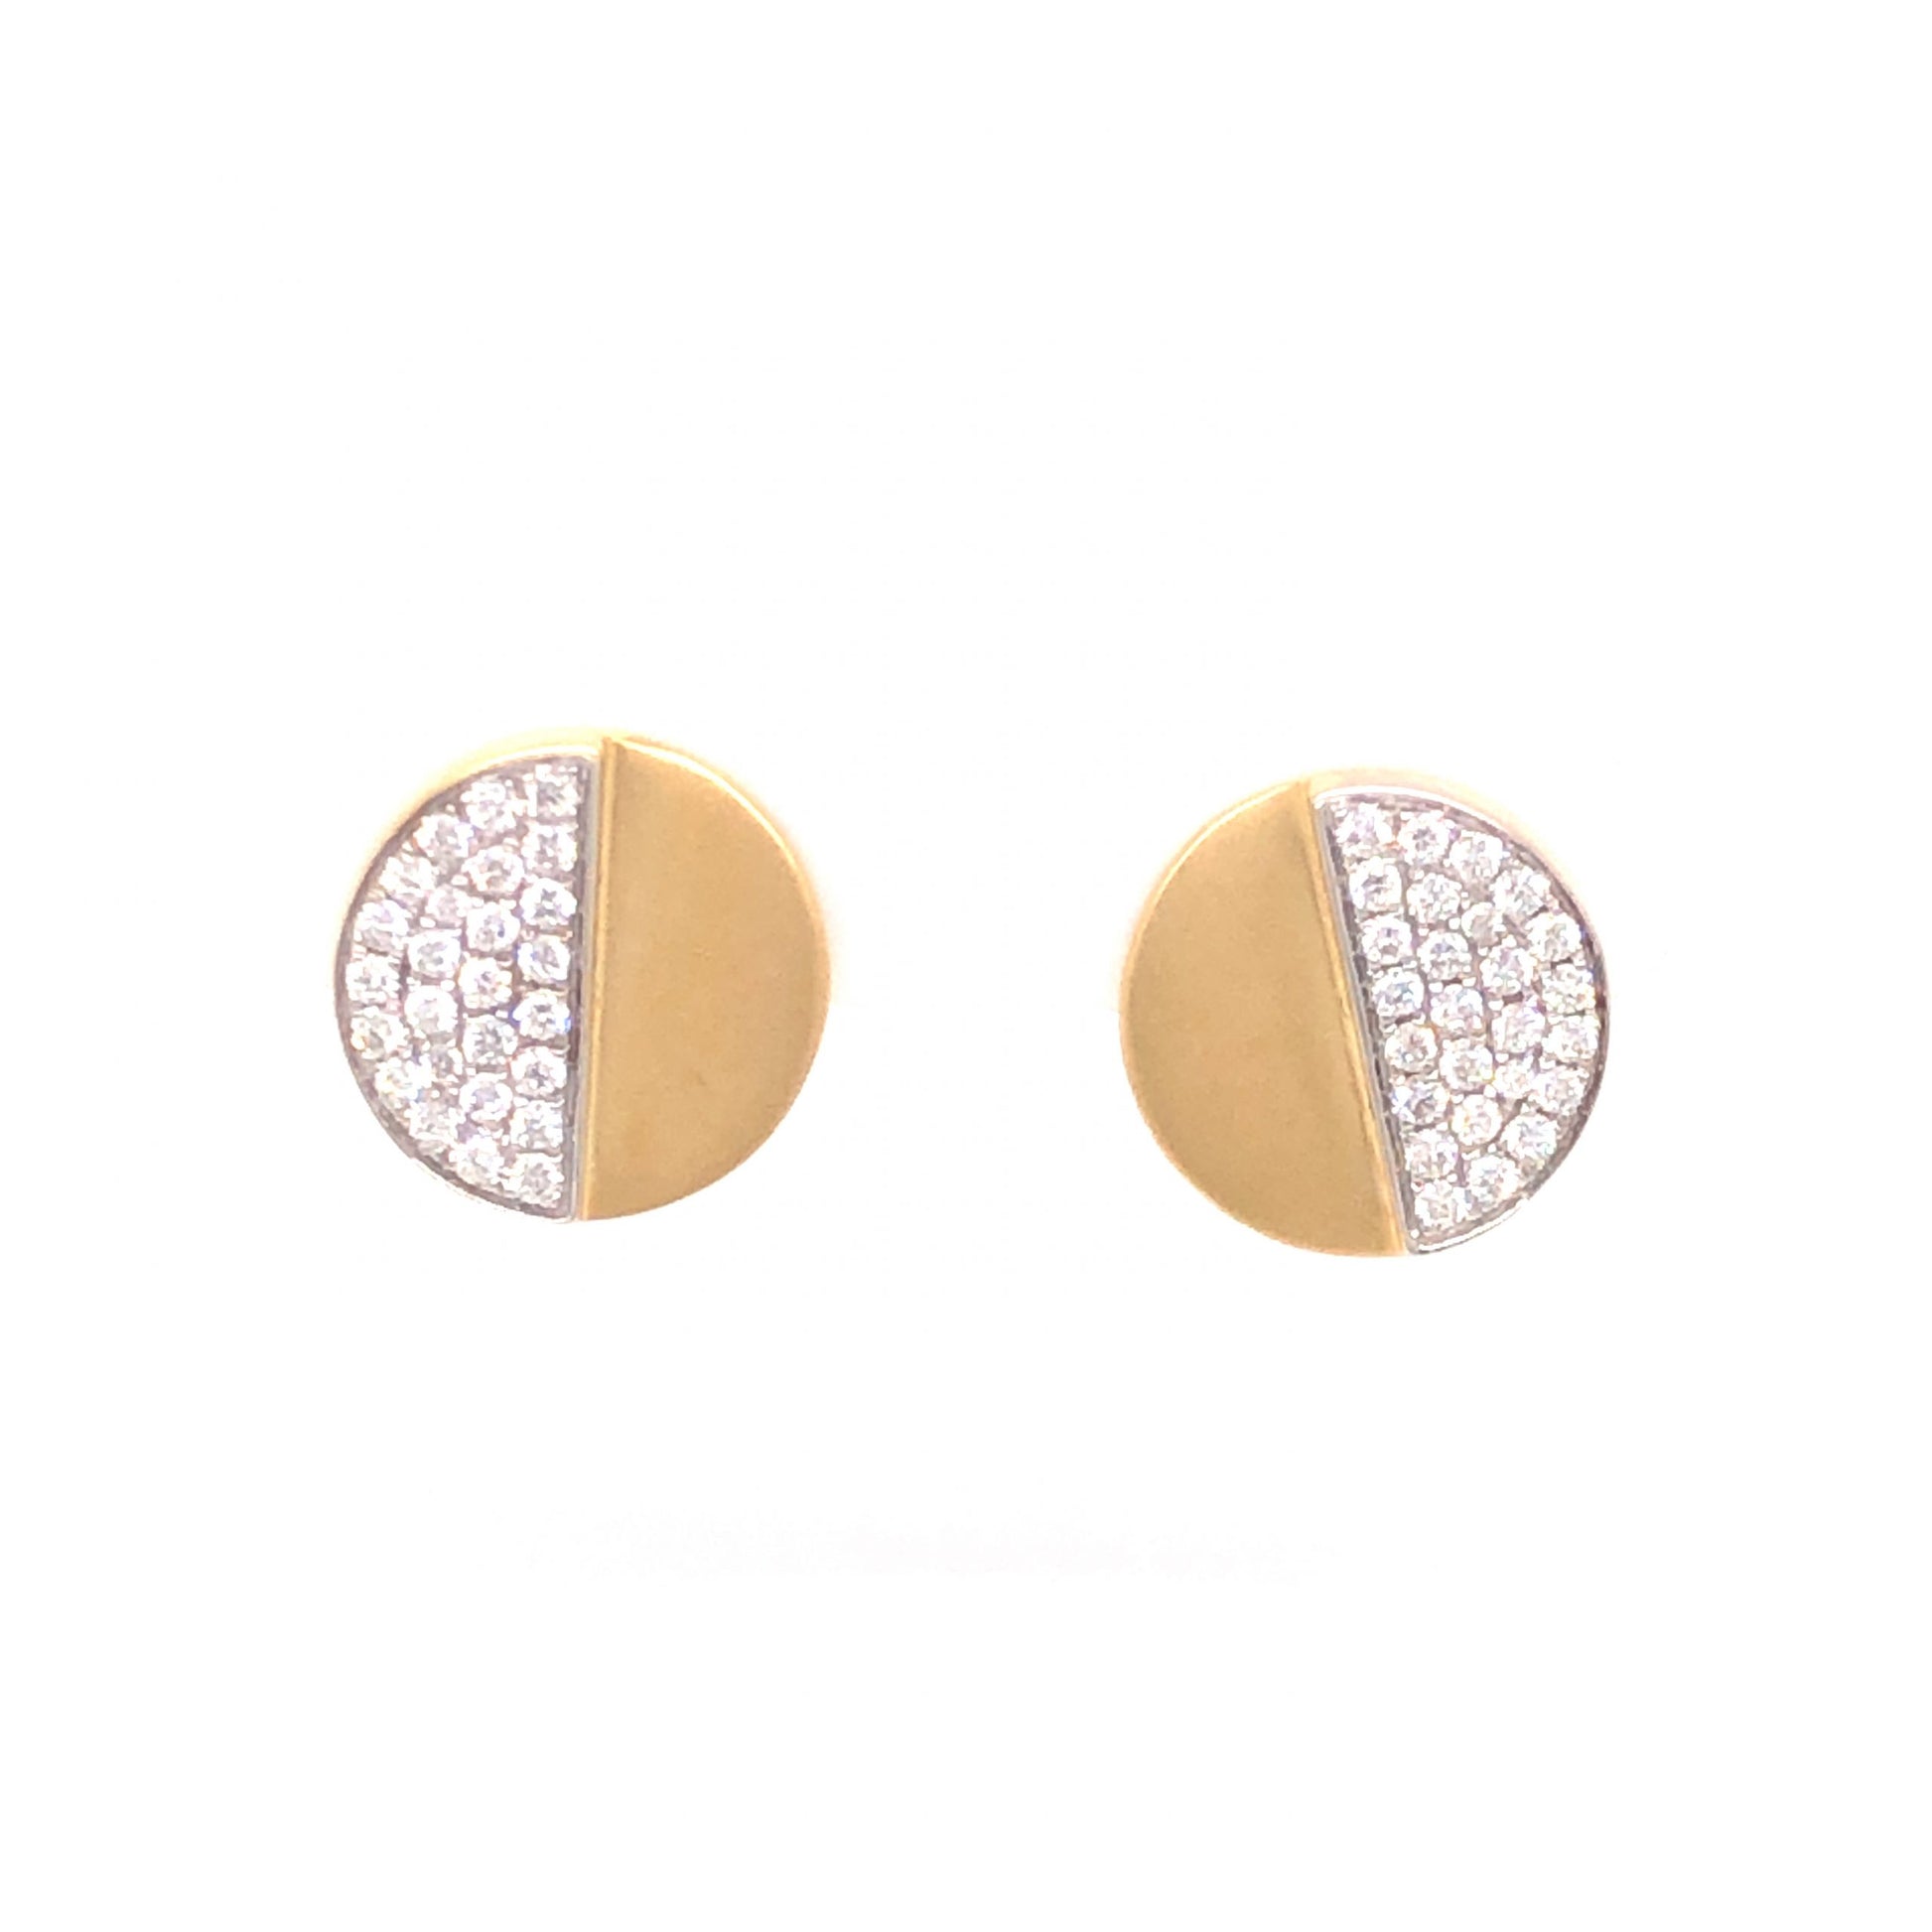 .50 Pave Diamond Earrings in 18k Yellow Gold